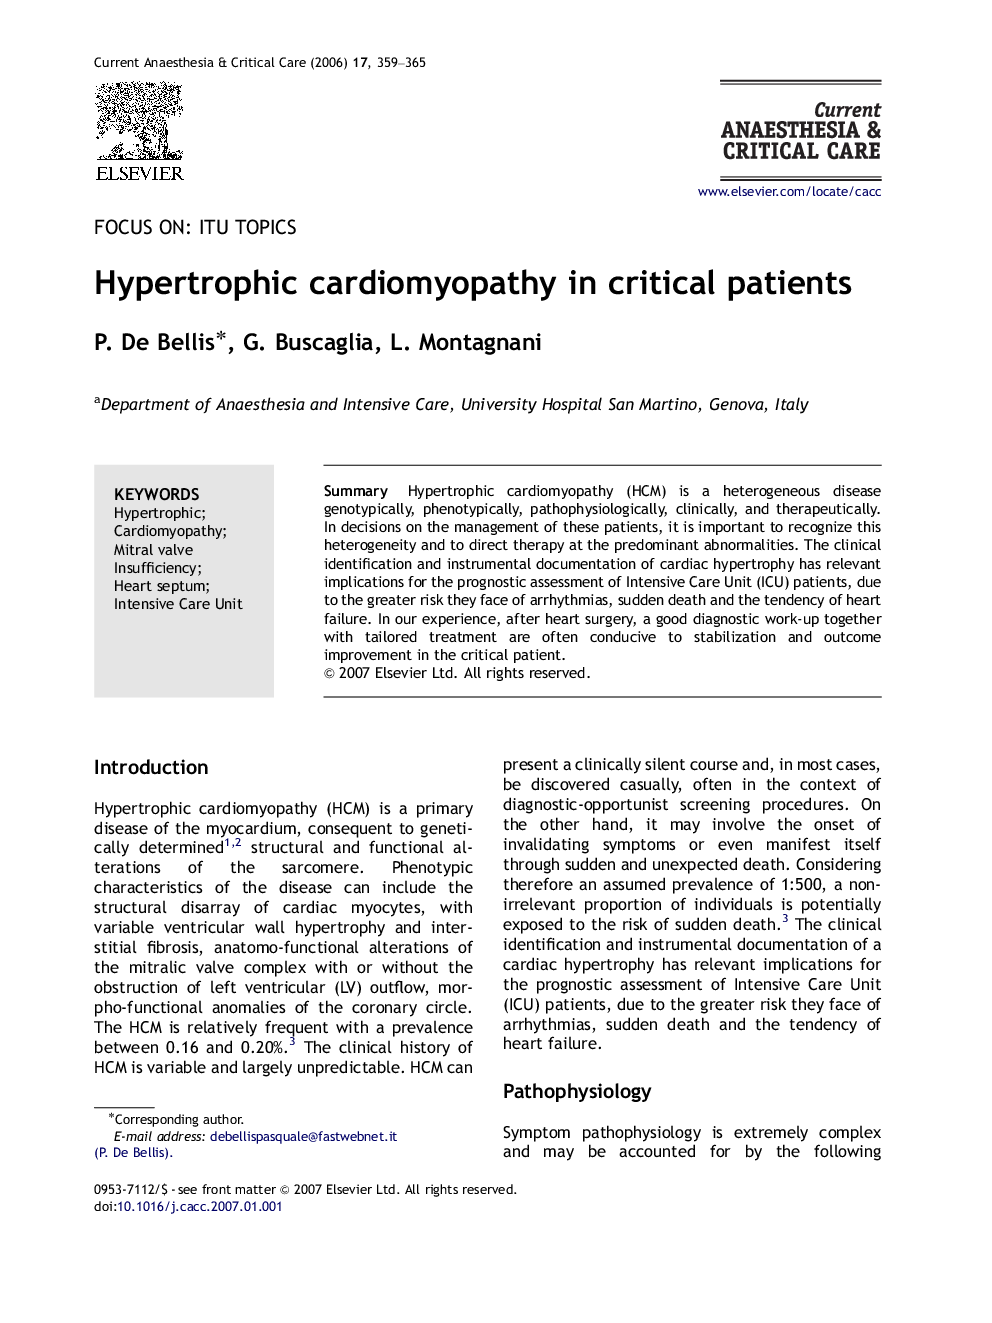 Hypertrophic cardiomyopathy in critical patients